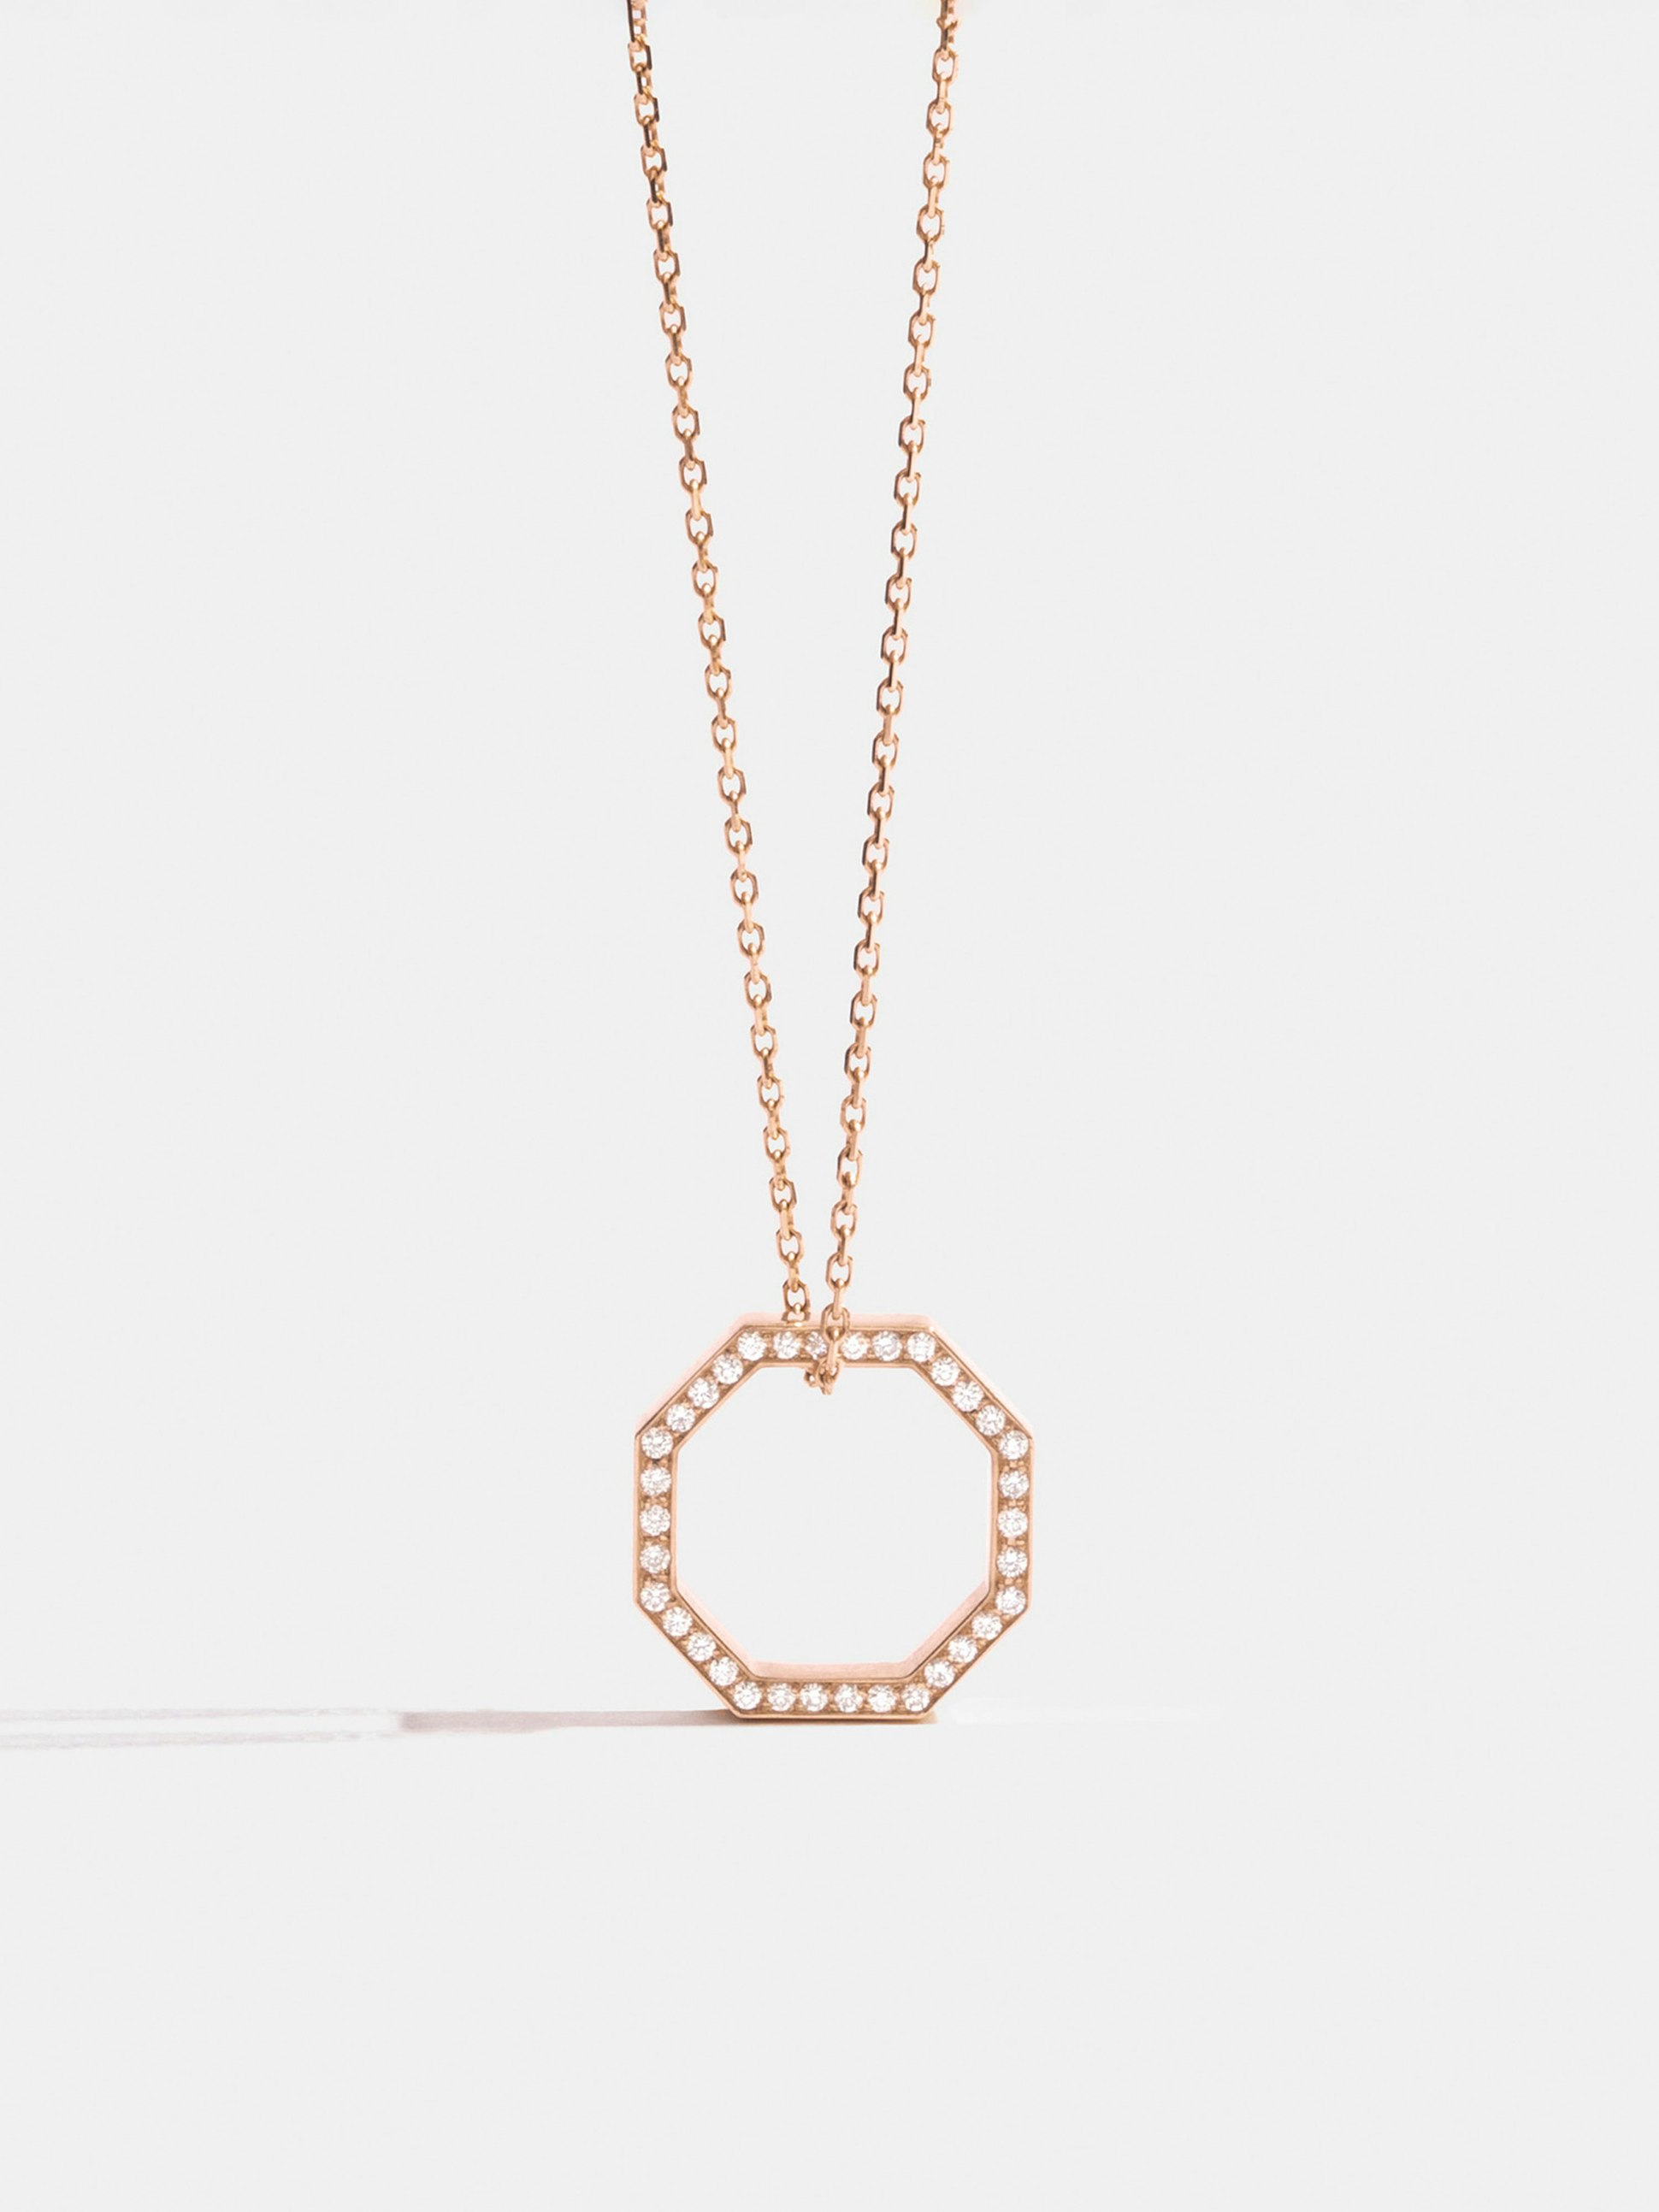 Octogone 14mm pendant in 18k Fairmined ethical rose gold, paved with lab-grown diamonds, on a chain.